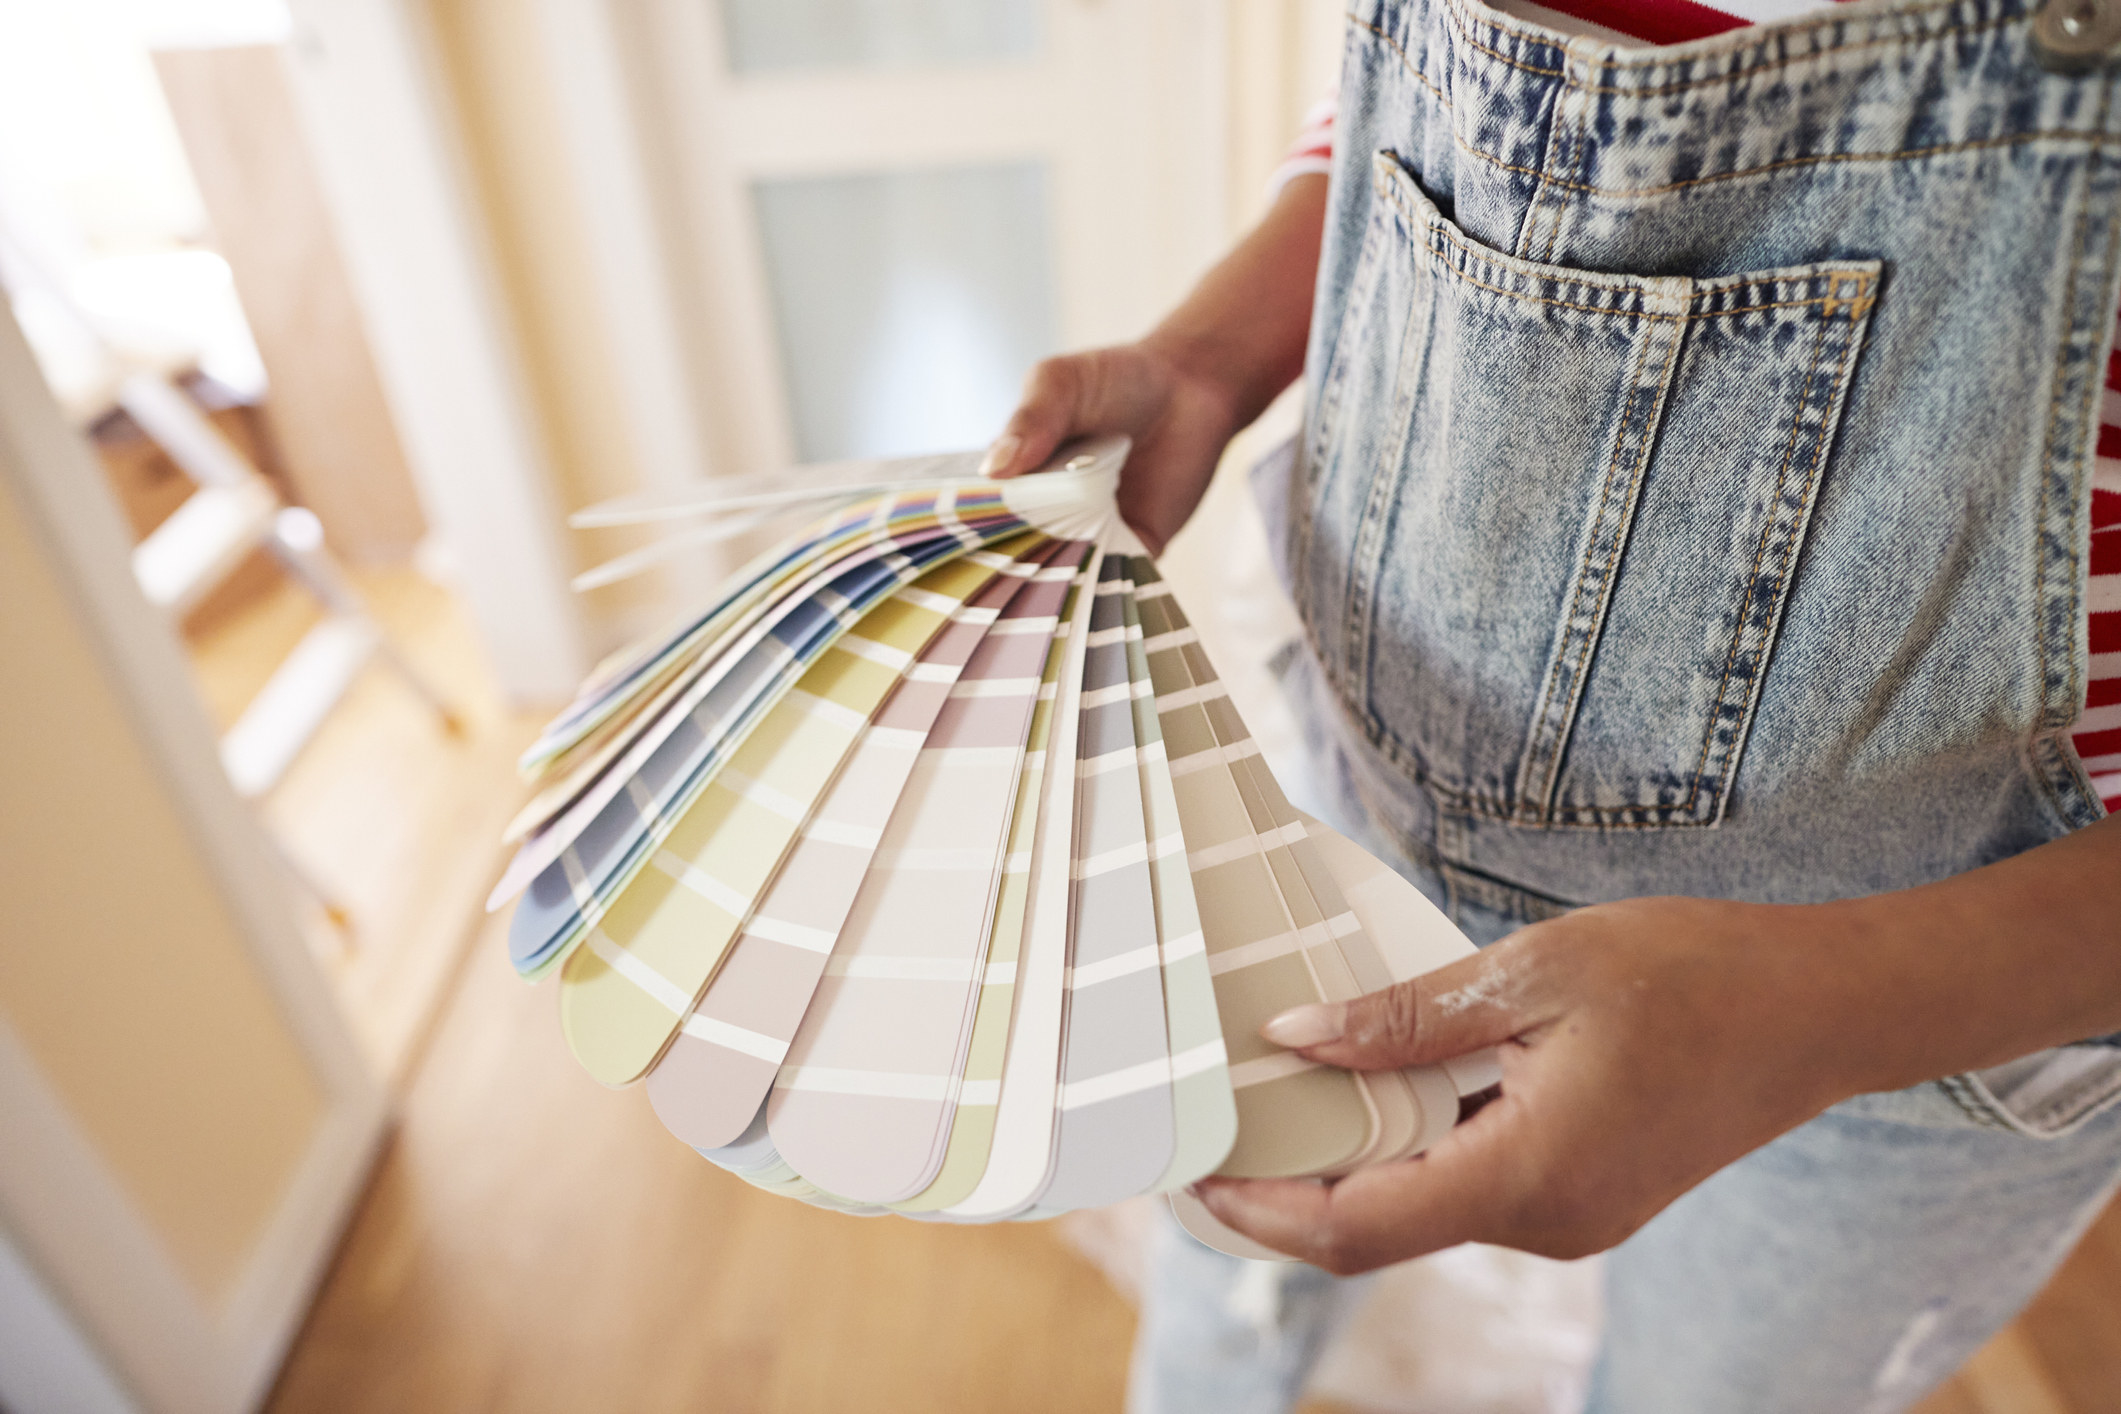 A pregnant woman choosing paint color from a swatch at home